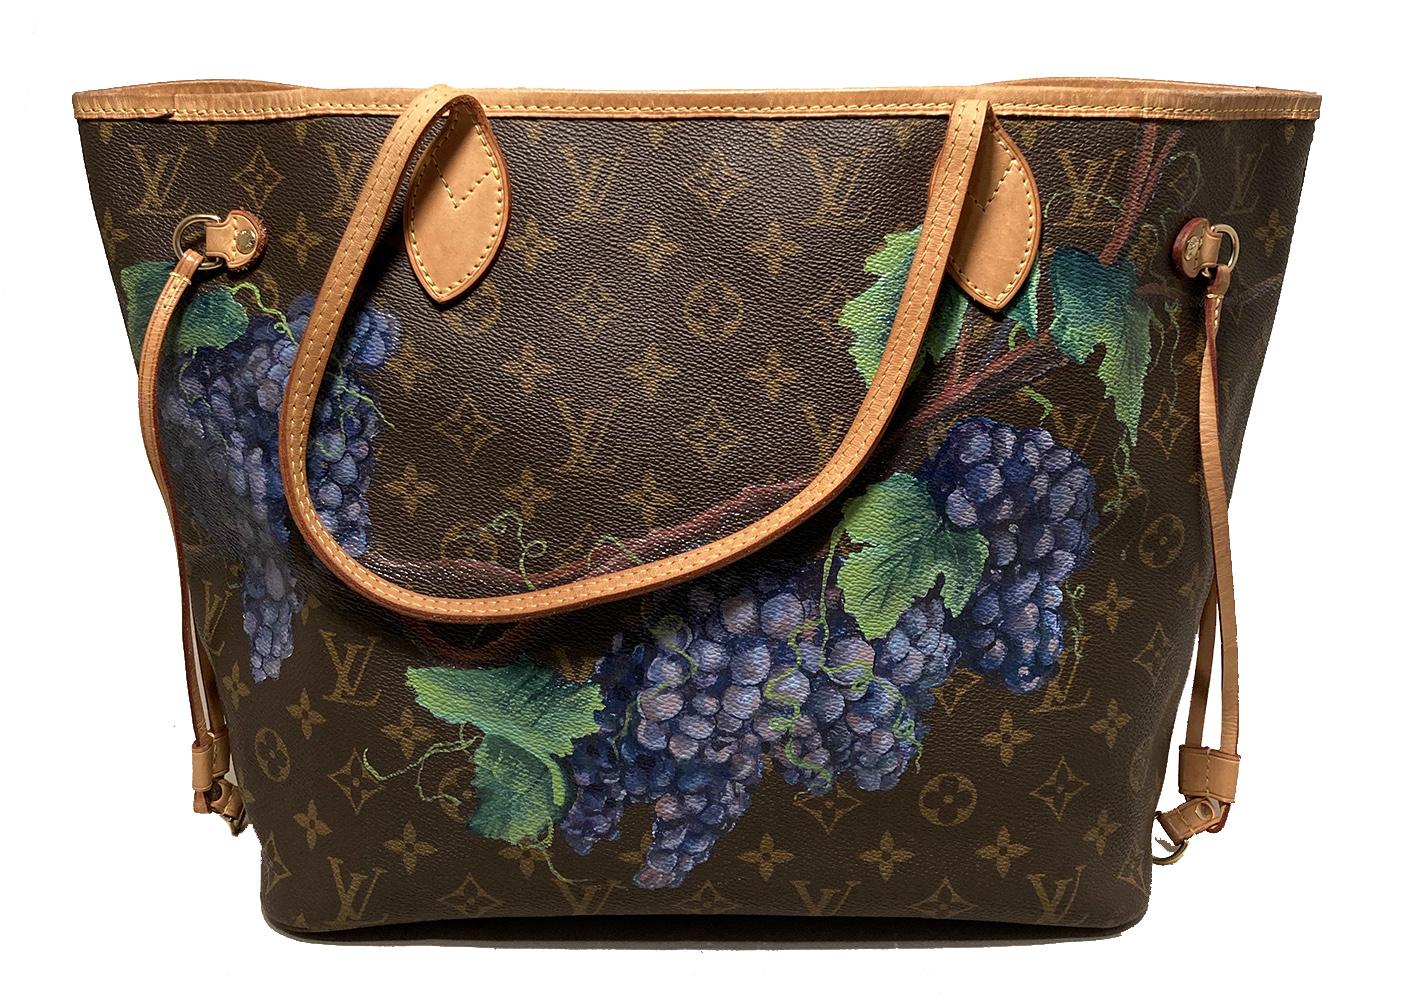 Louis Vuitton Neverfull MM with Hand Painted Grapes in very good condition. Signature monogram canvas exterior trimmed with tan leather, brass hardware, and hand painted grapes and grape leaves along front and back sides. Top spring ring closure